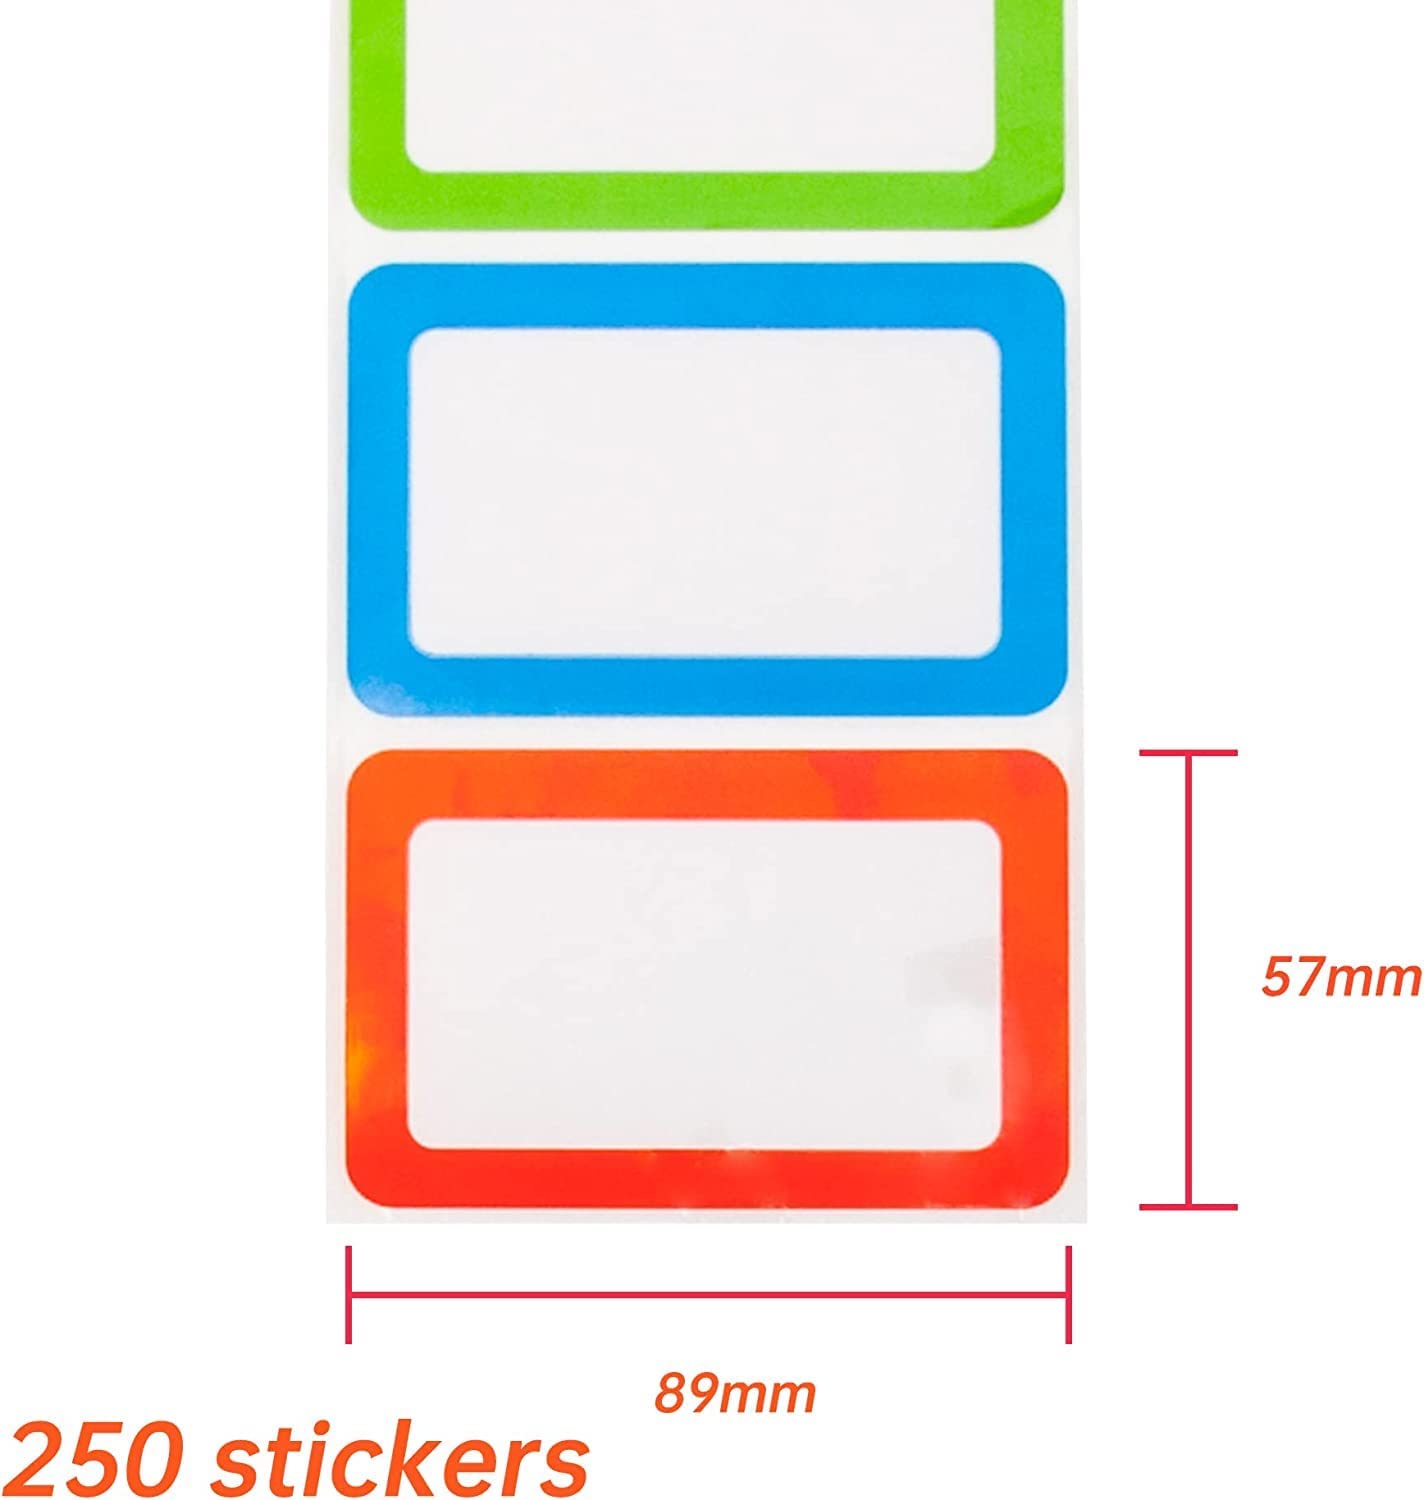 Name Tag Name identification stickers for students in a multi-colored design